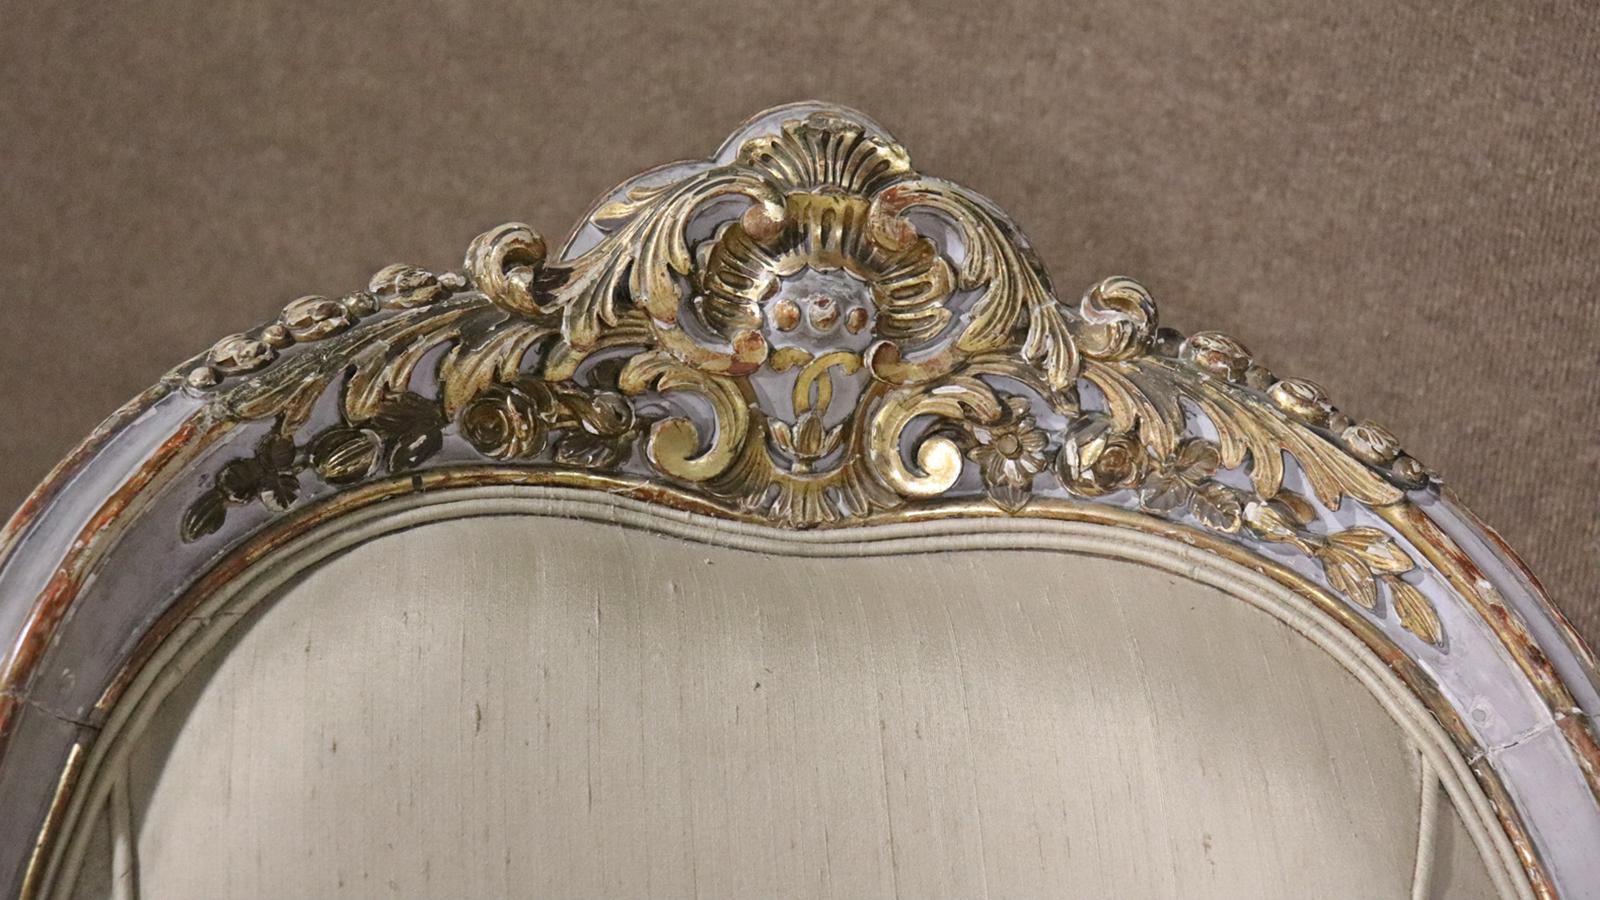 European Rare Paint Decorated and Gilded Meridian Chaise Daybed with Putti Cherubs